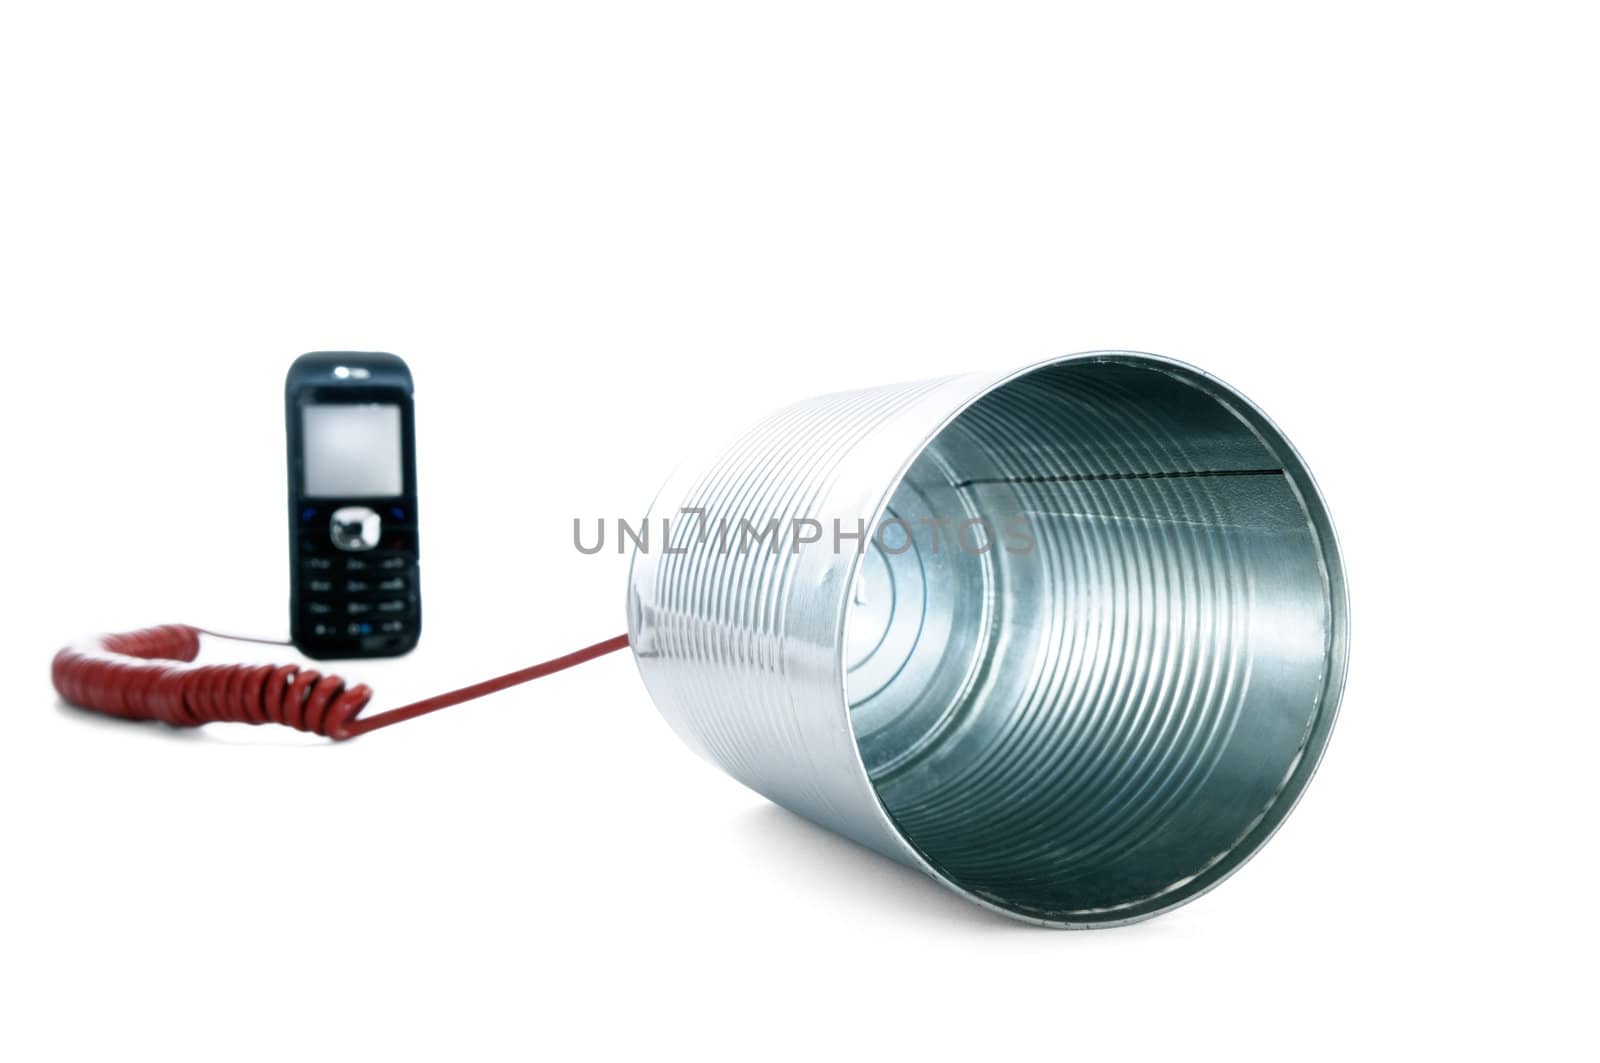 Tin can phone wired to a mobile phone over white background.